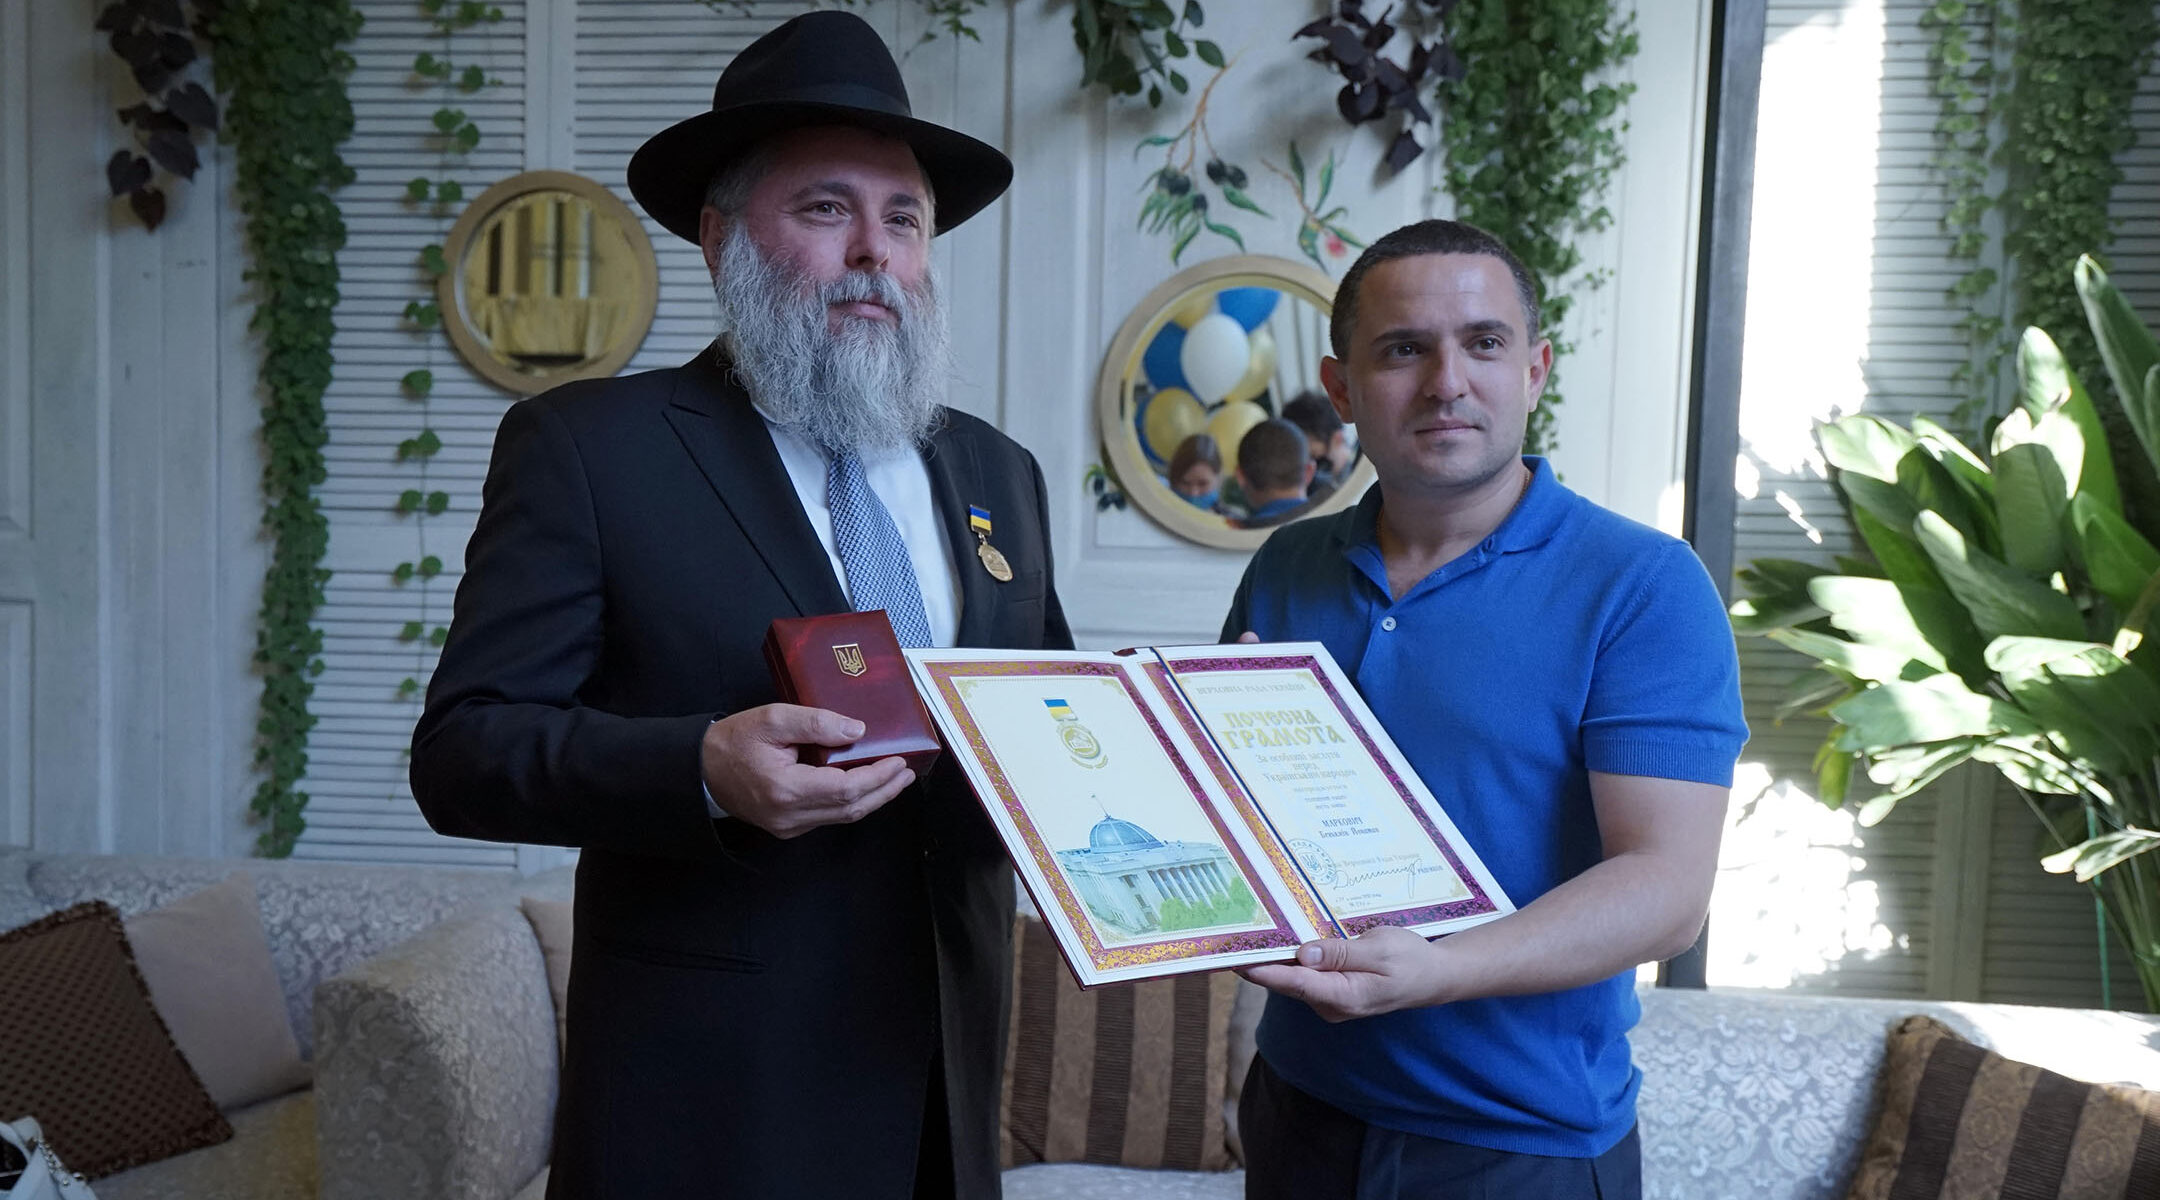 Rabbi Yonatan Markovitch, left, holds up a medal and a certificate he received at the parliament of Ukraine in Kyiv on Sept. 7, 2020. (Courtesy of Markovitch)